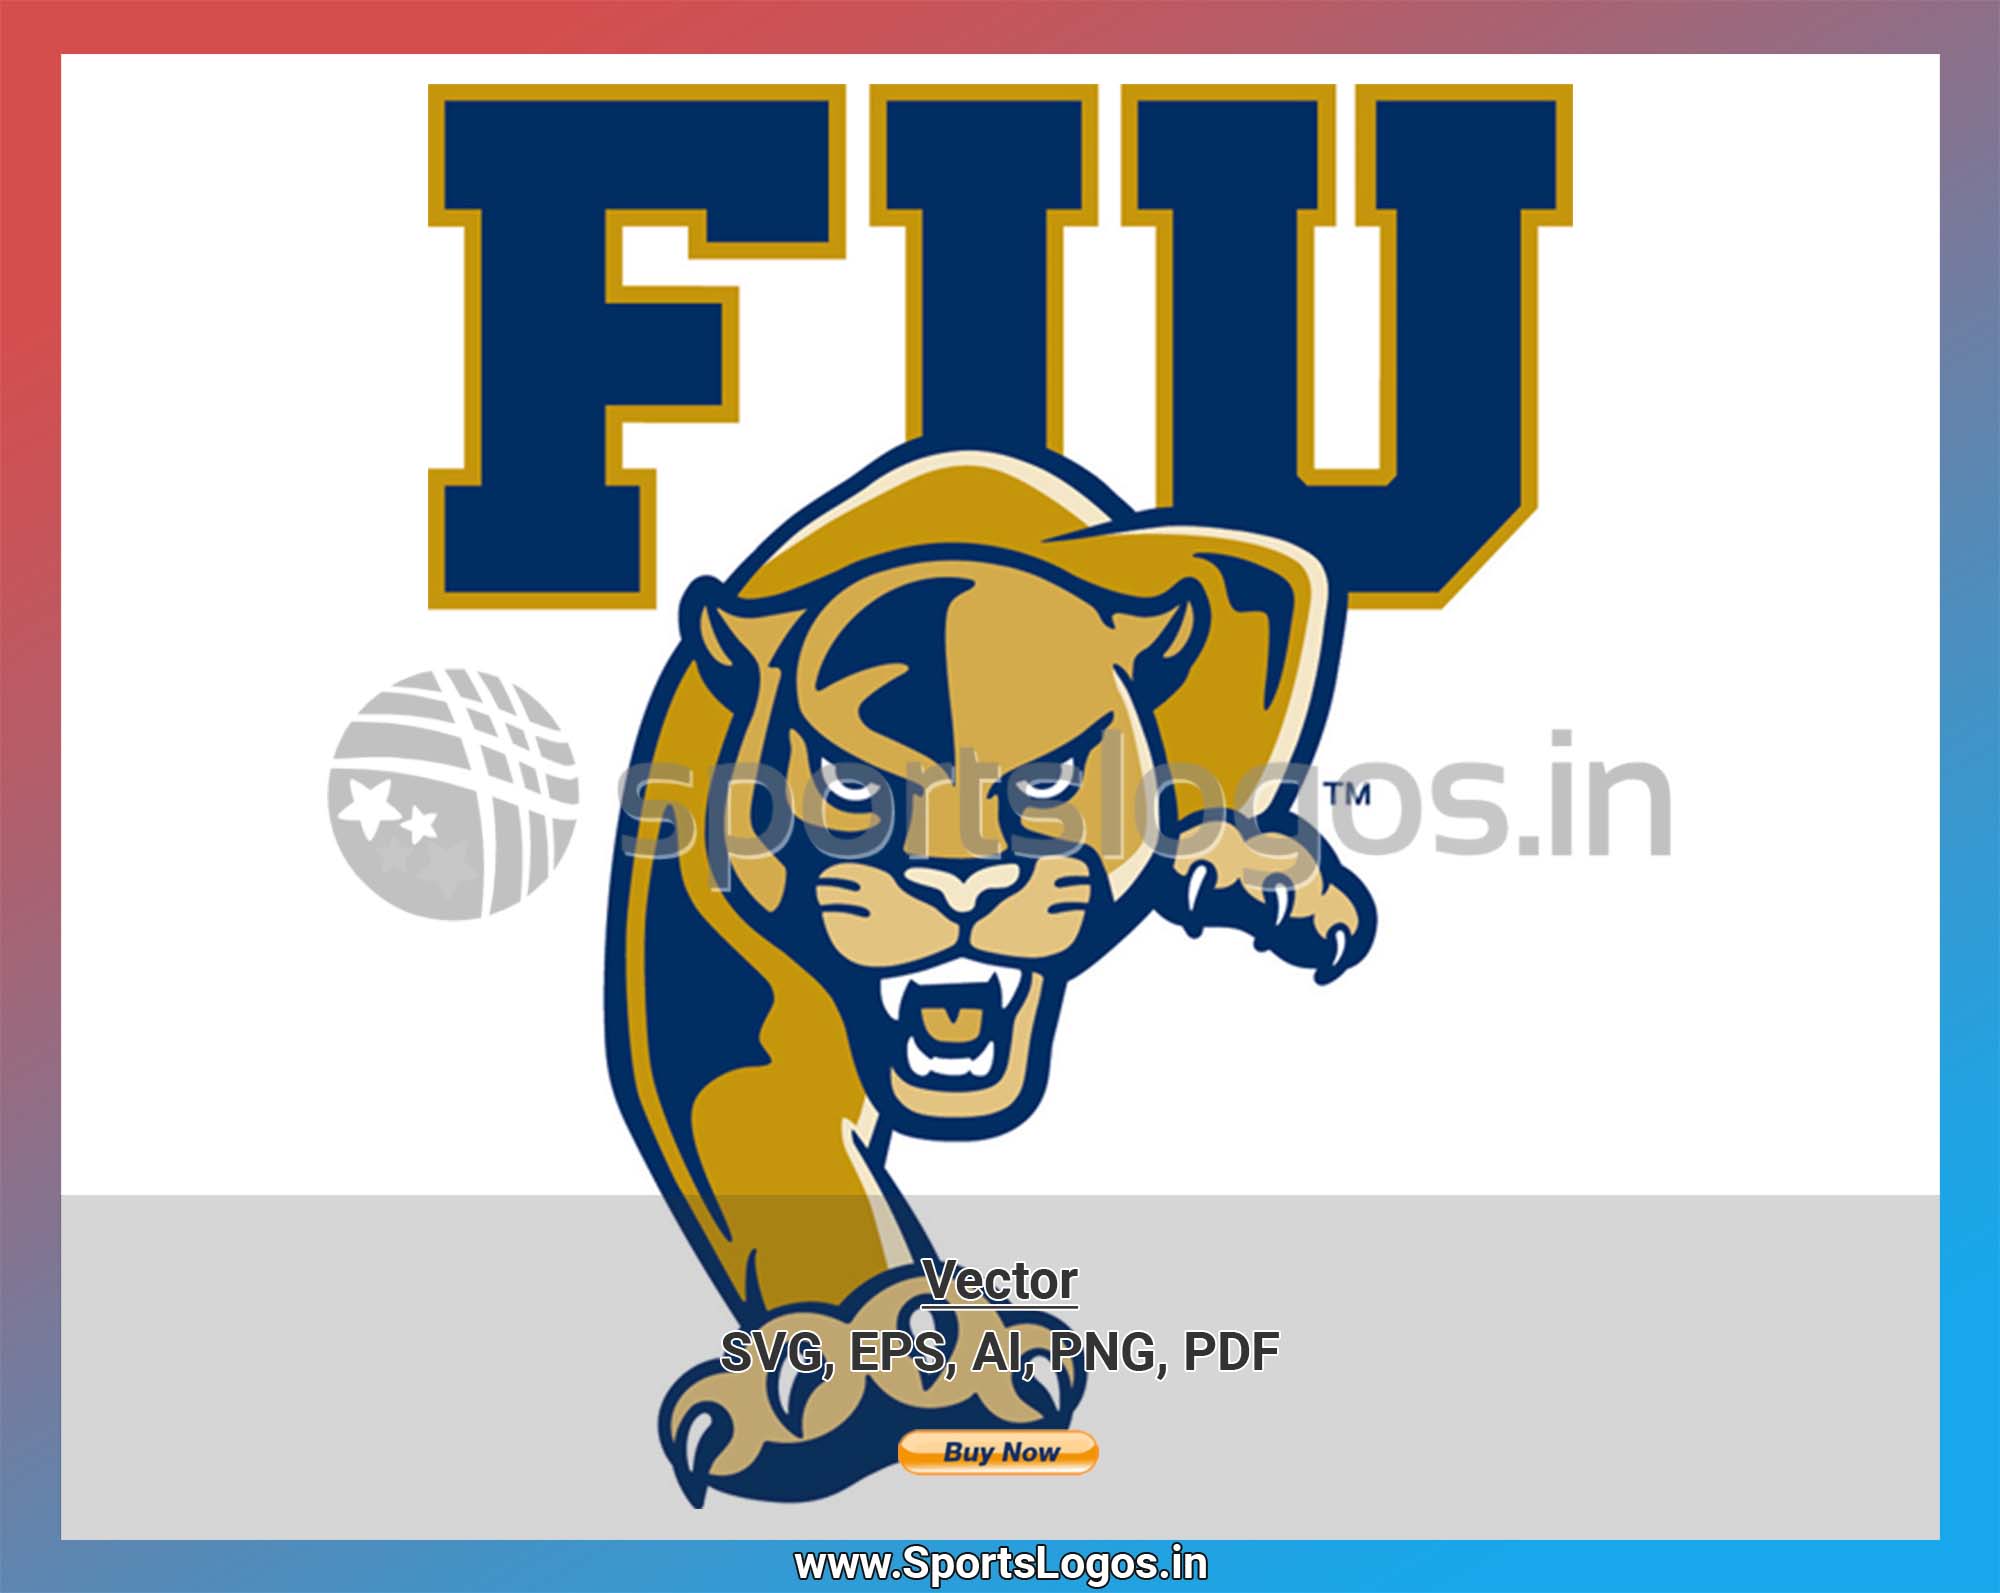 FIU Panthers Vive La Fete Game Day Collegiate Large Logo on Thigh